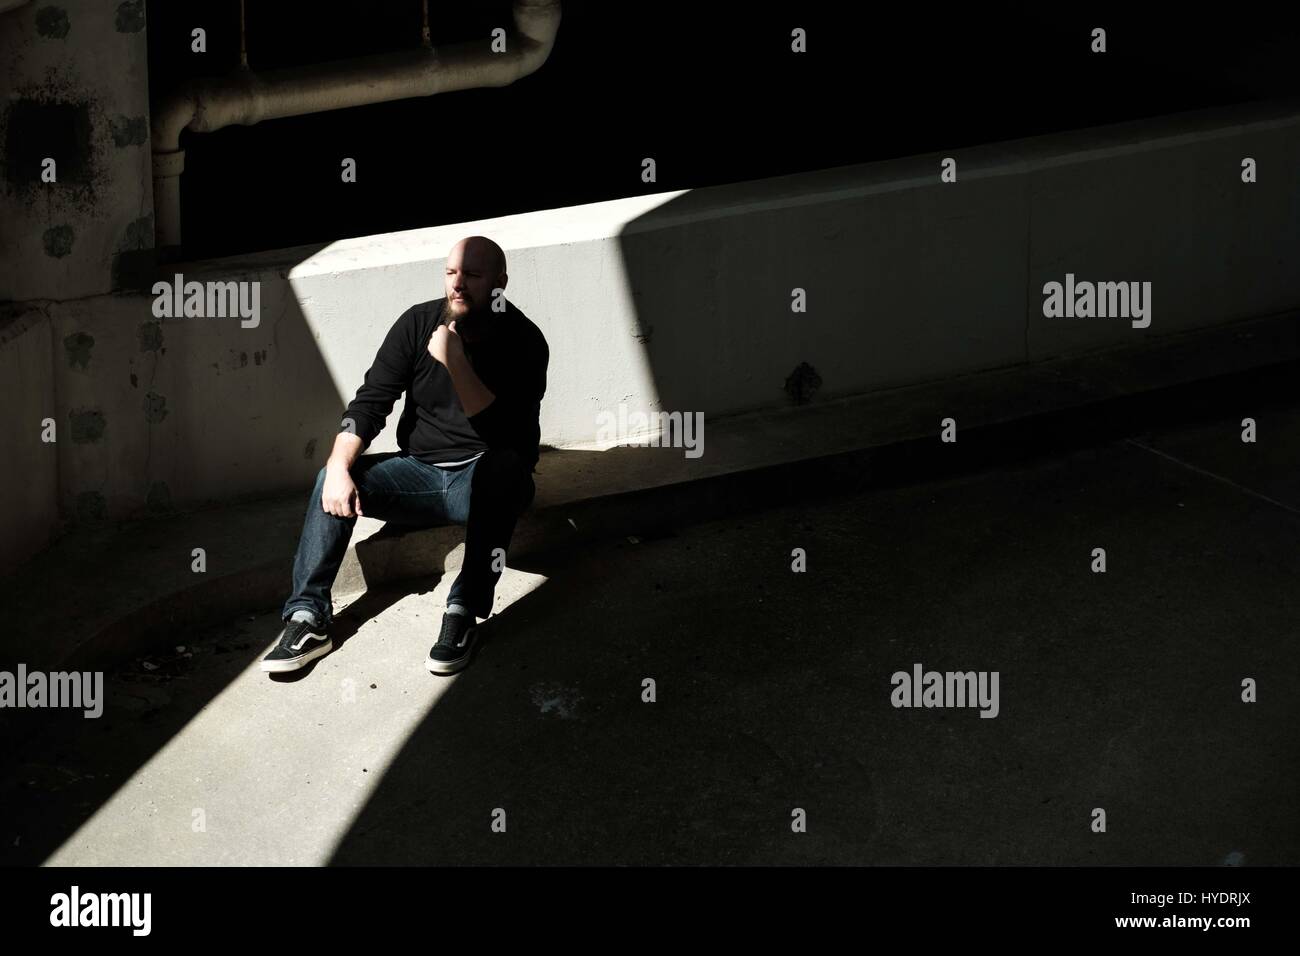 Portrait of a man with bald head and long beard sitting in a sliver of light in a parking garage Stock Photo